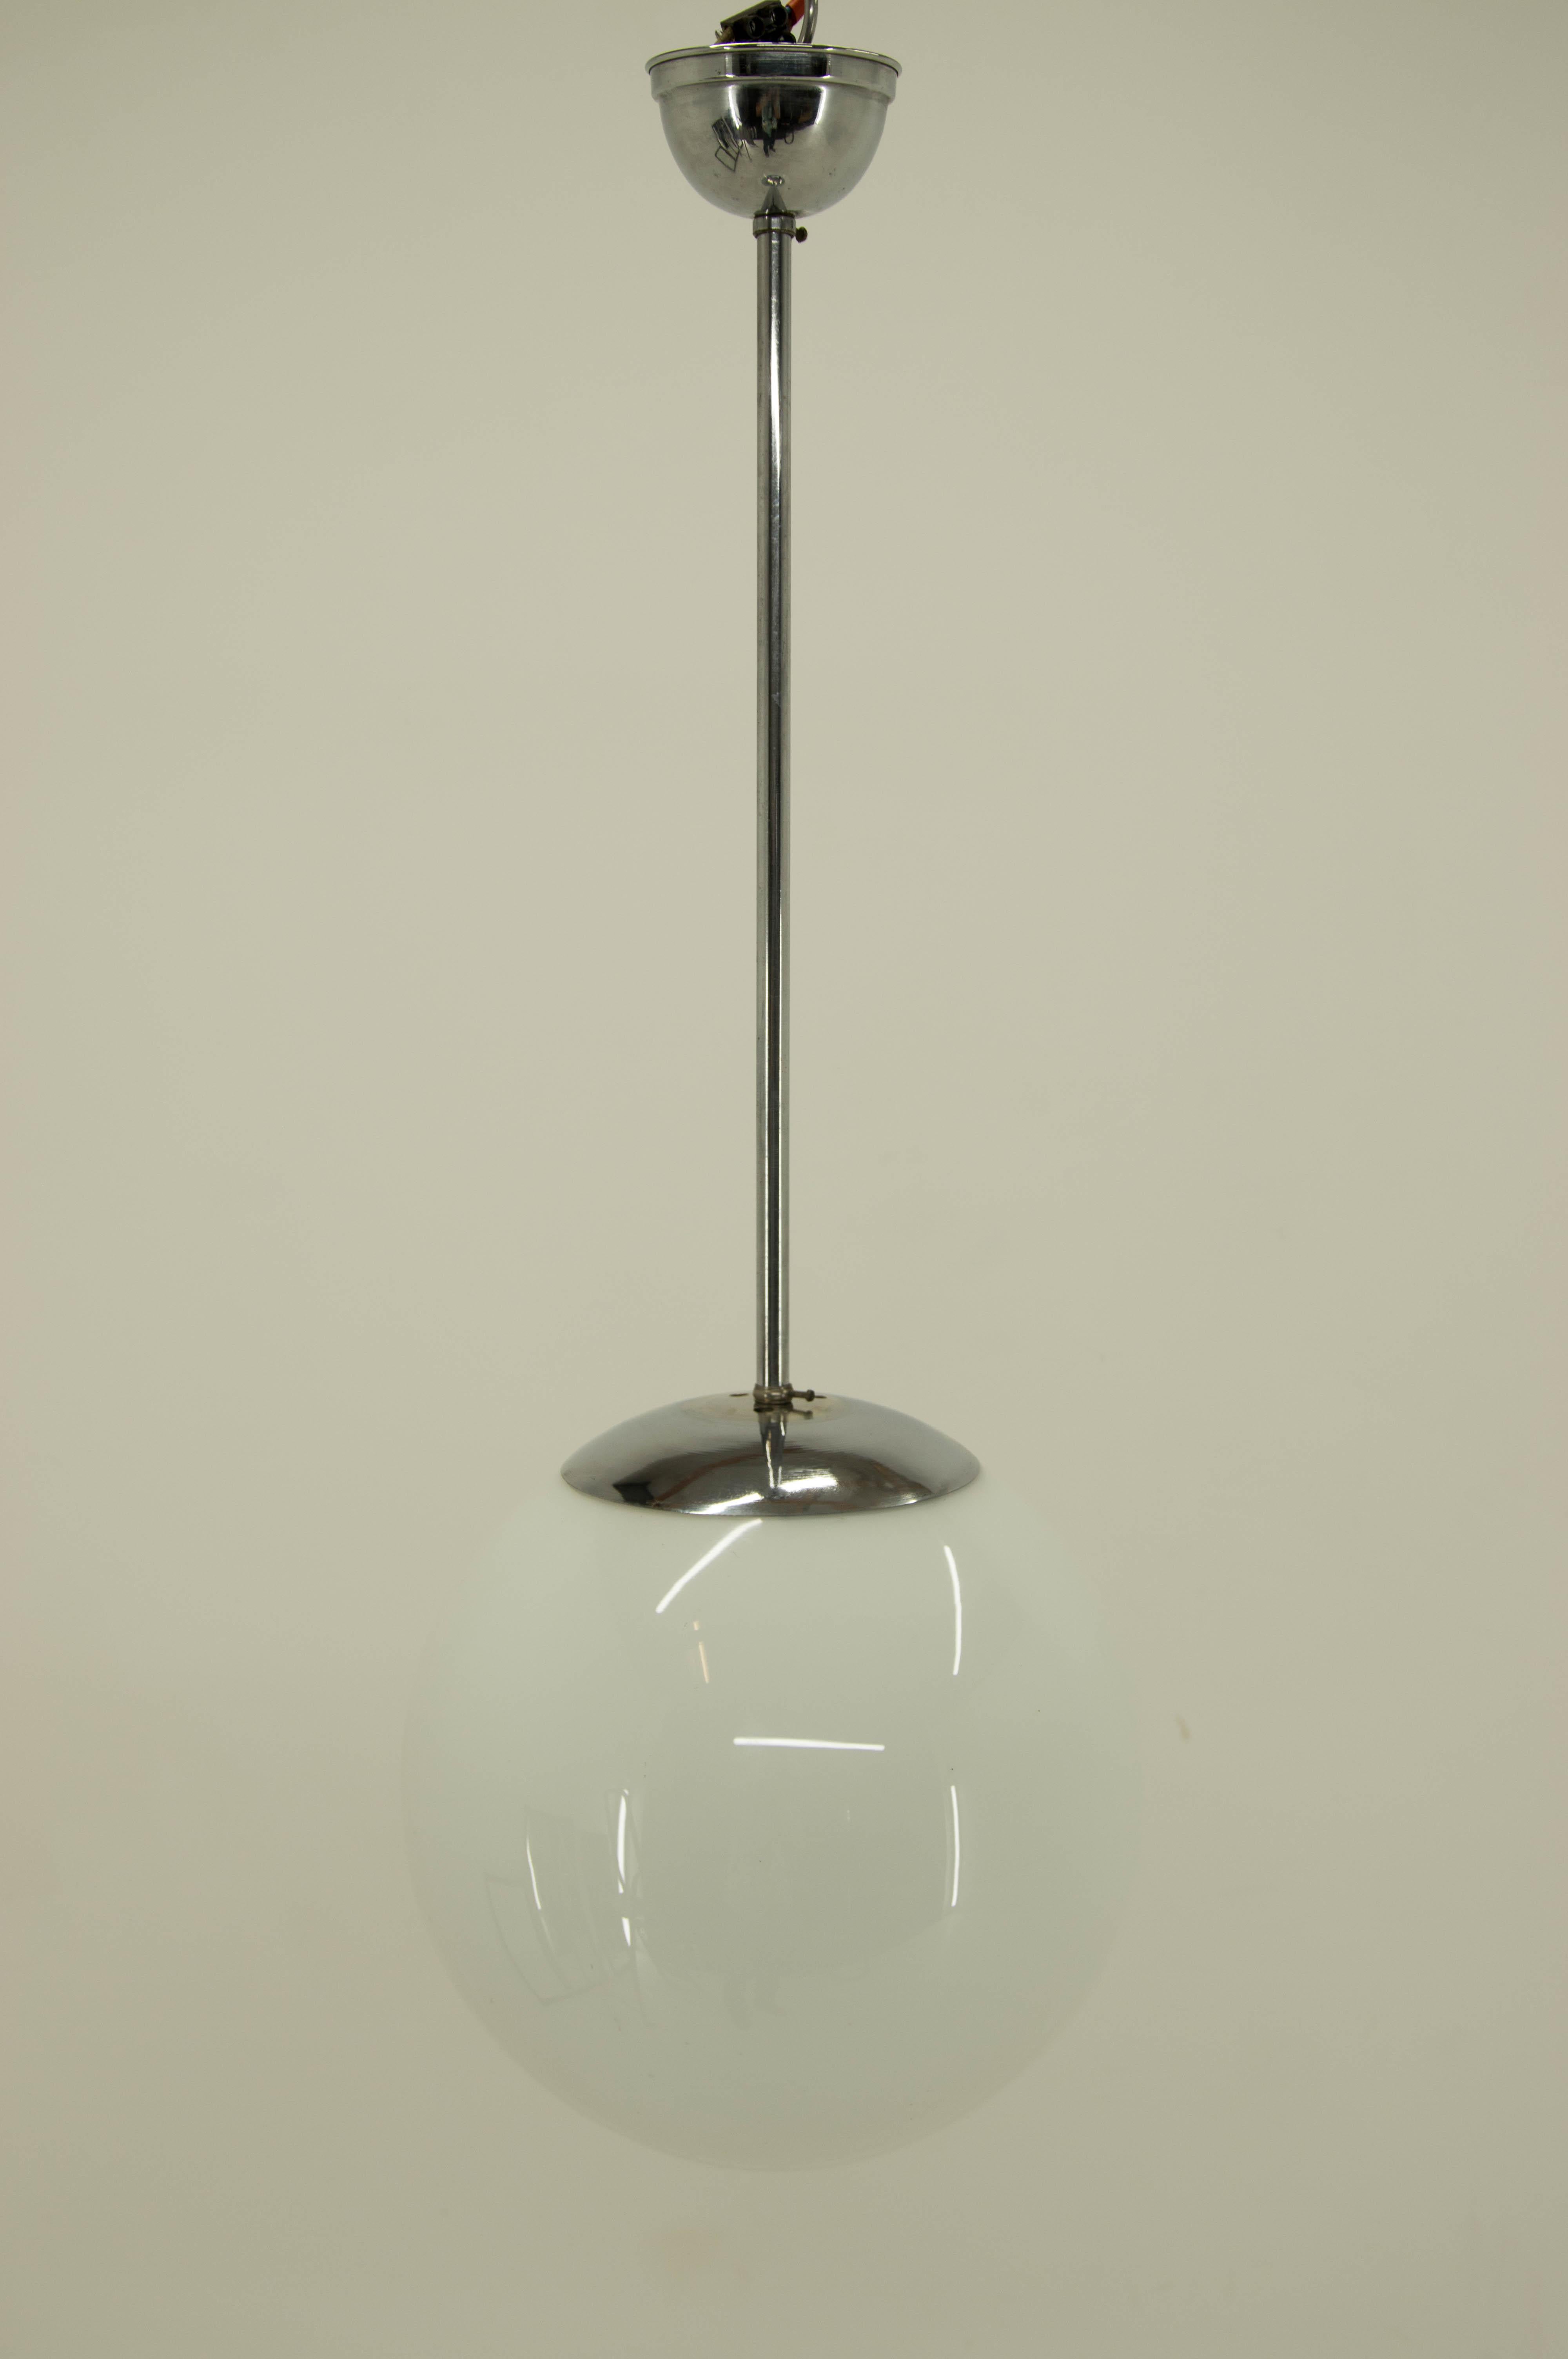 Czech Chrome-Plated Bauhaus Minimalistic Chandelier by Franta Anyz, Type 5878, 1930s For Sale